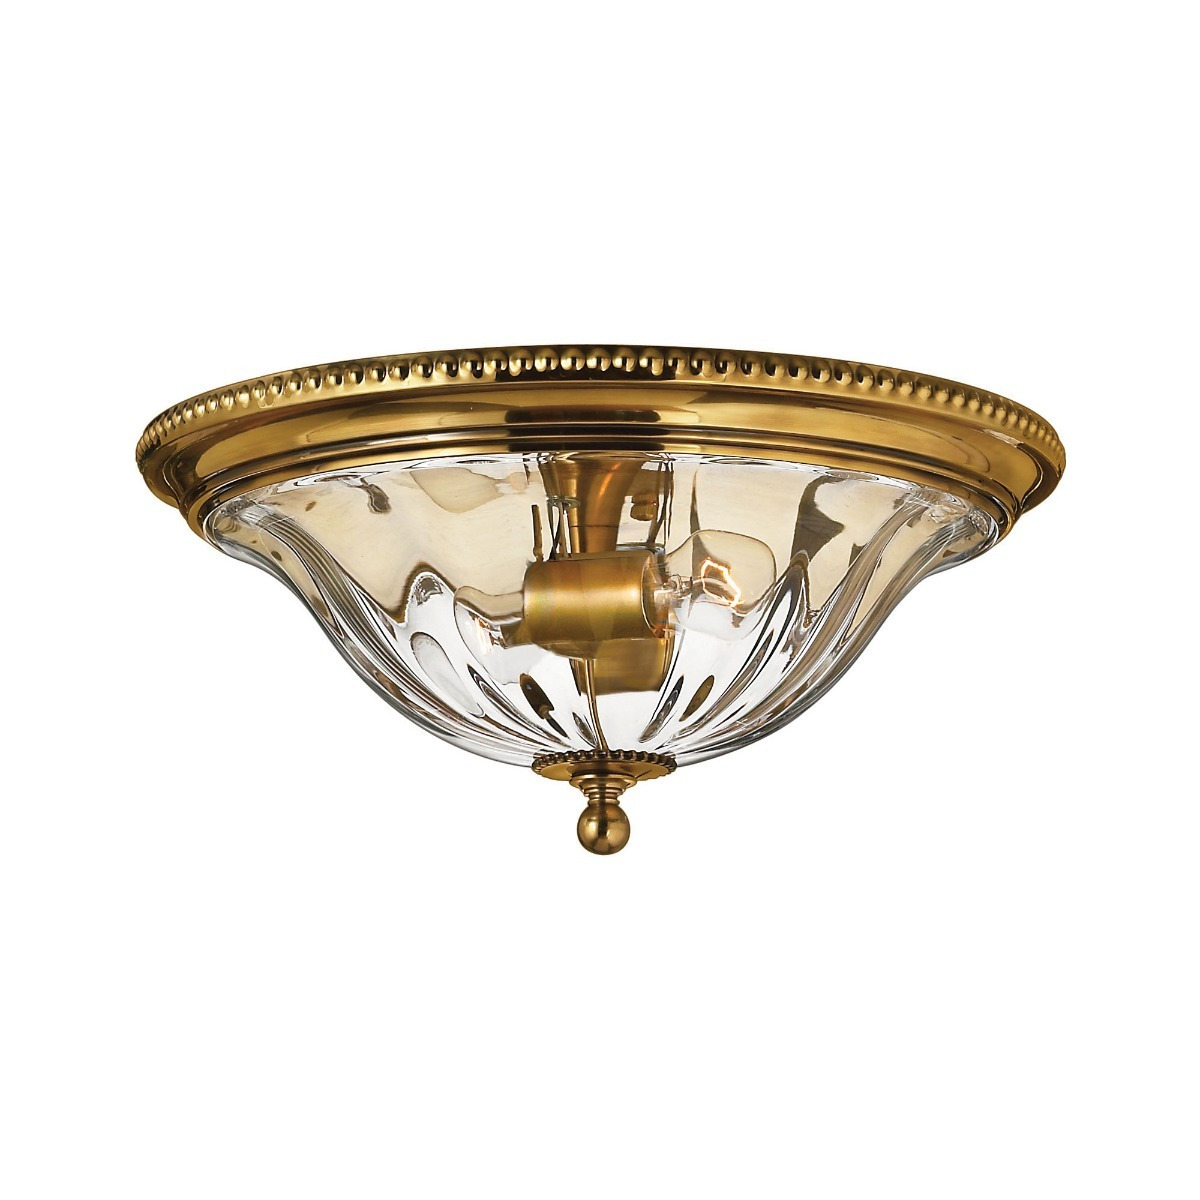 HK-CAMBRIDGE-F-A Cambridge Solid Brass and Glass Flush Ceiling Light